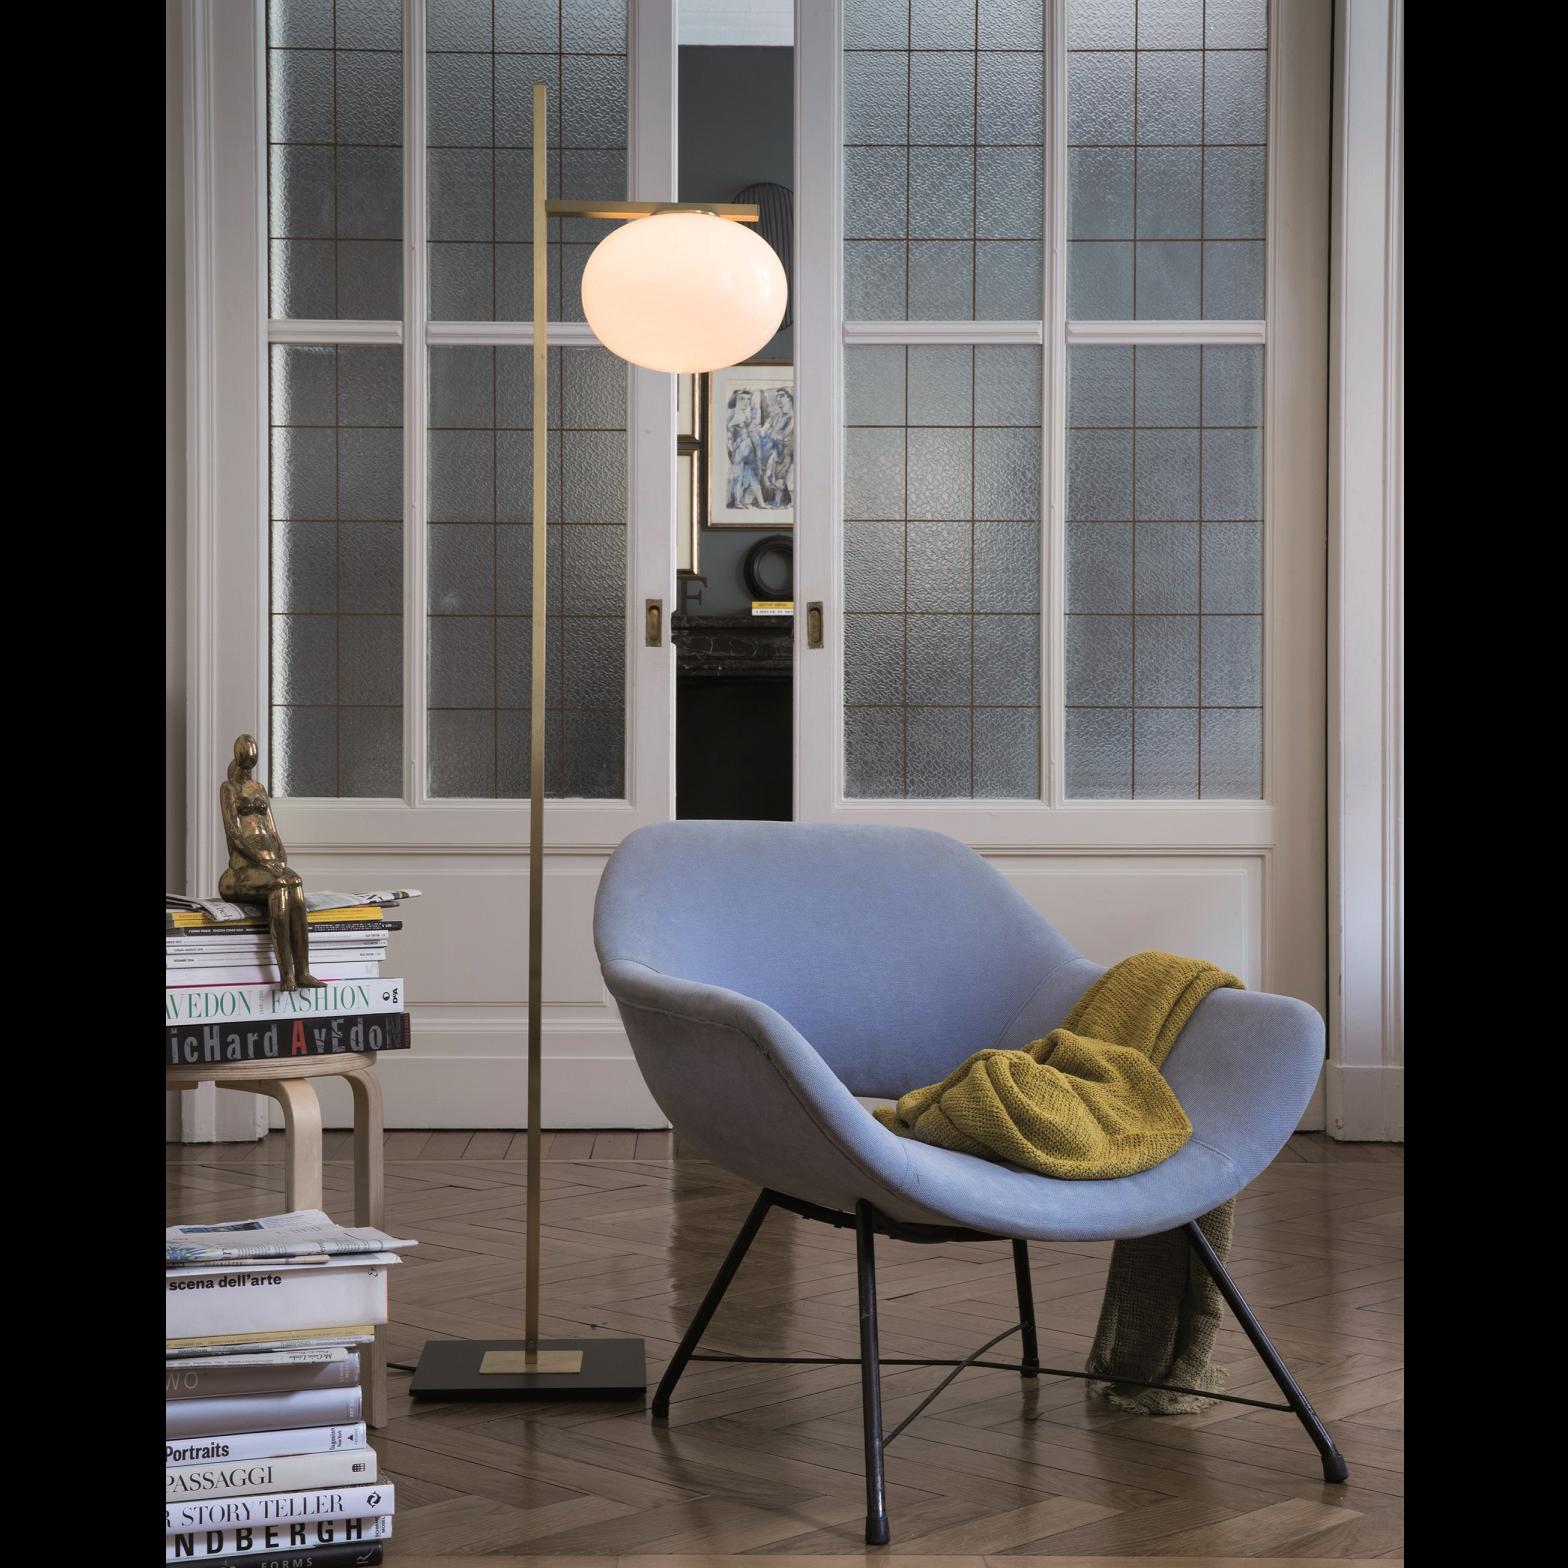 Floor lamp 'Alba' designed by Mariana Pellegrino Soto in 2017.
Floor lamp giving diffused light in polished opaline blown-glass. Satin brass or anodic bronze finish structure with rectangular profile. With universal dimmer.
Manufactured by Oluce,